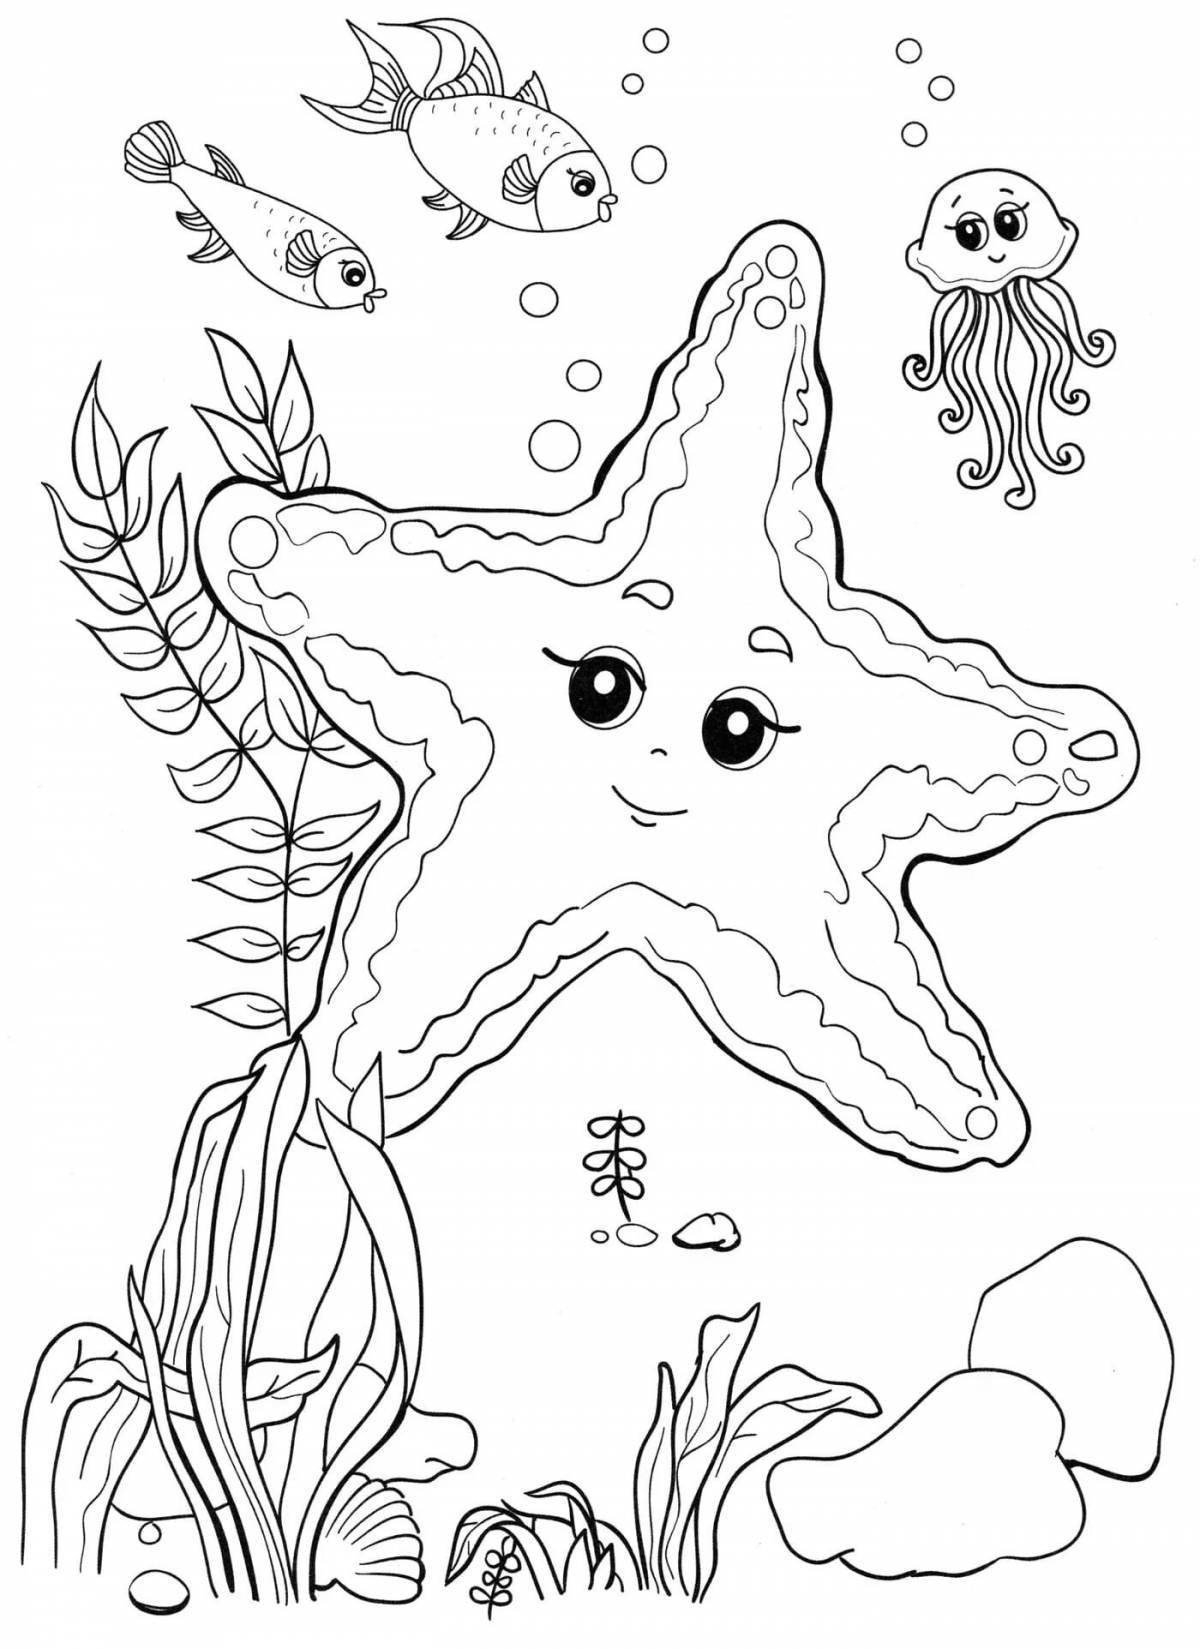 Sea inhabitants of the seas and oceans for children #5